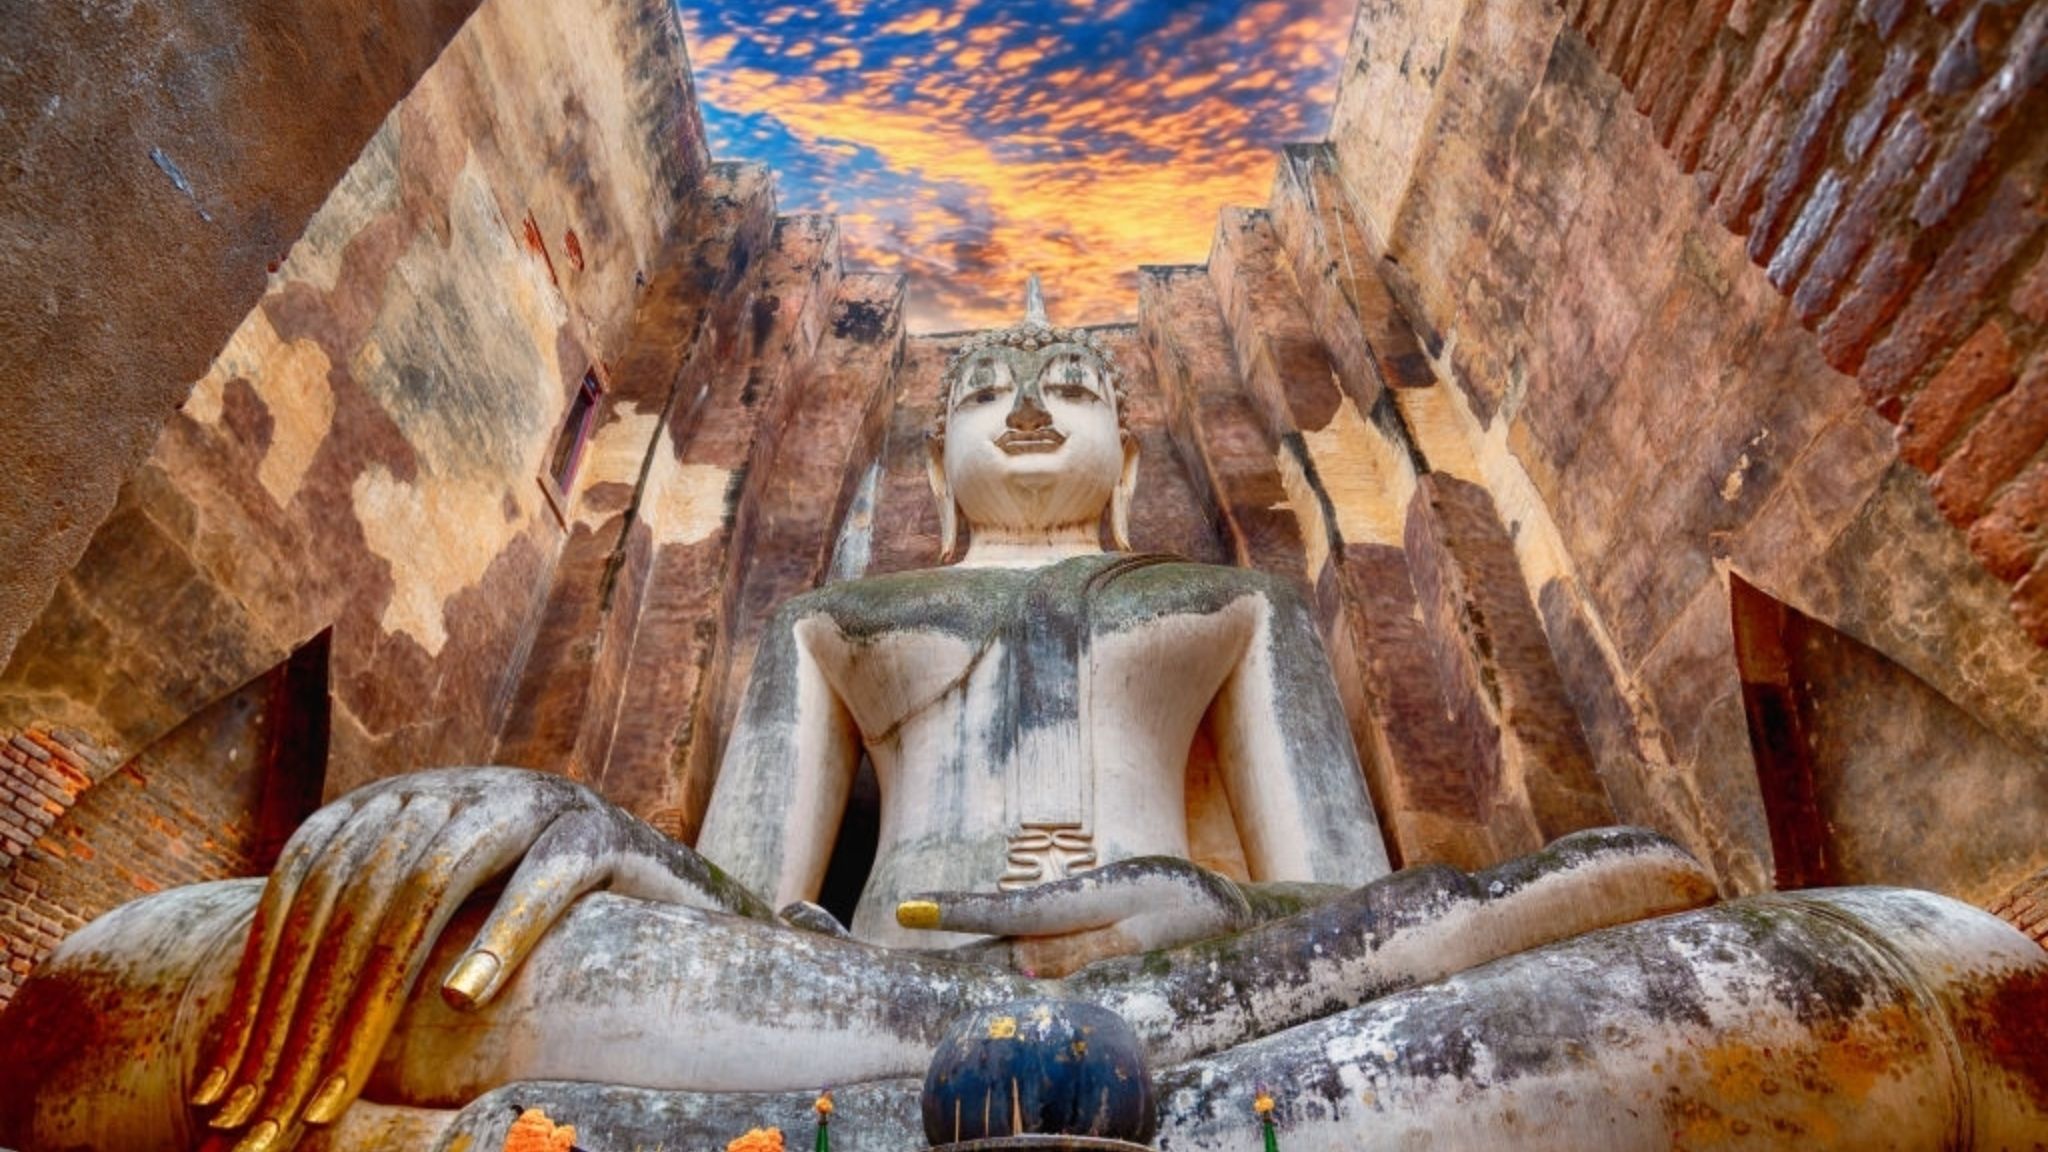 Sukhothai, One Of Asia’s Most Important Historical Sites